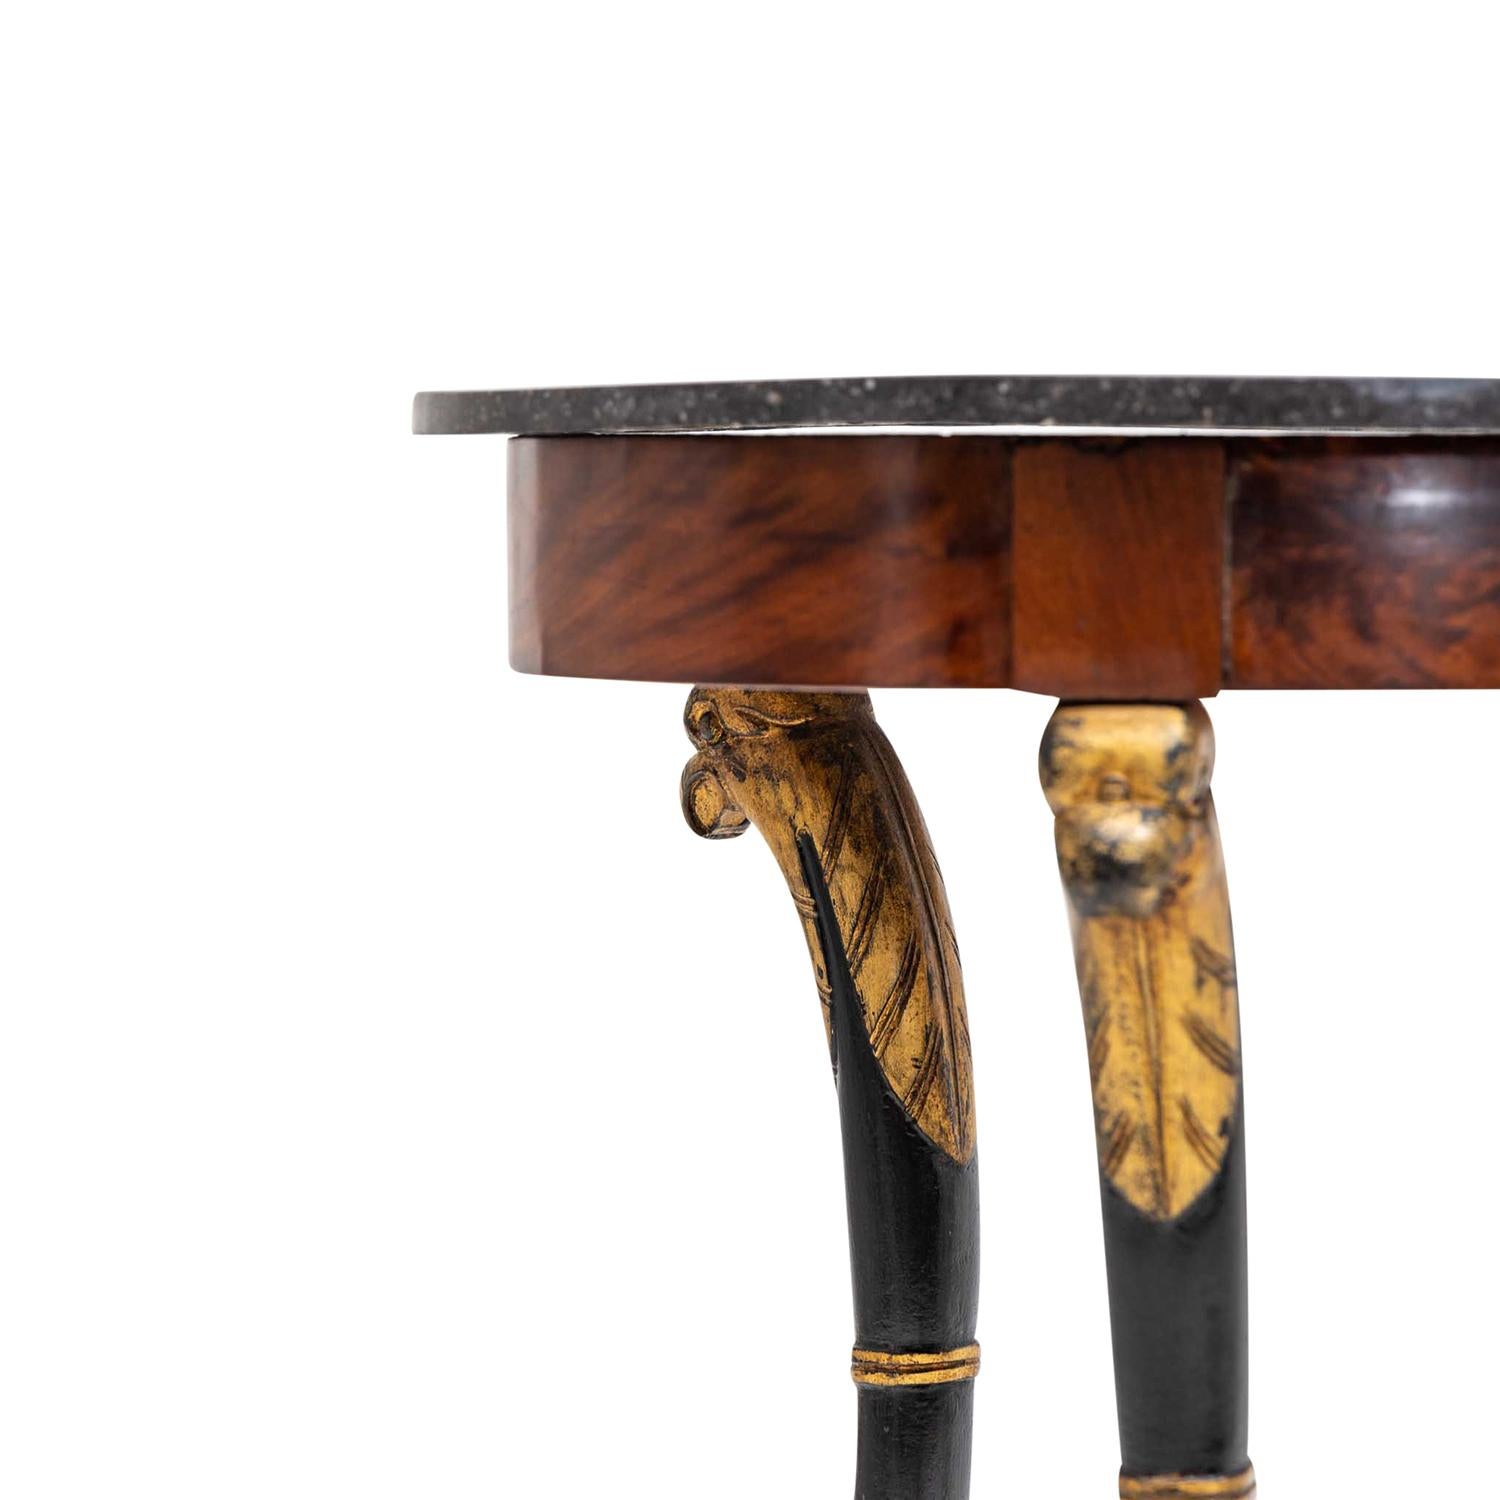 Giltwood 19th Century French Empire Round Mahogany Side Table - Antique Marble Table For Sale